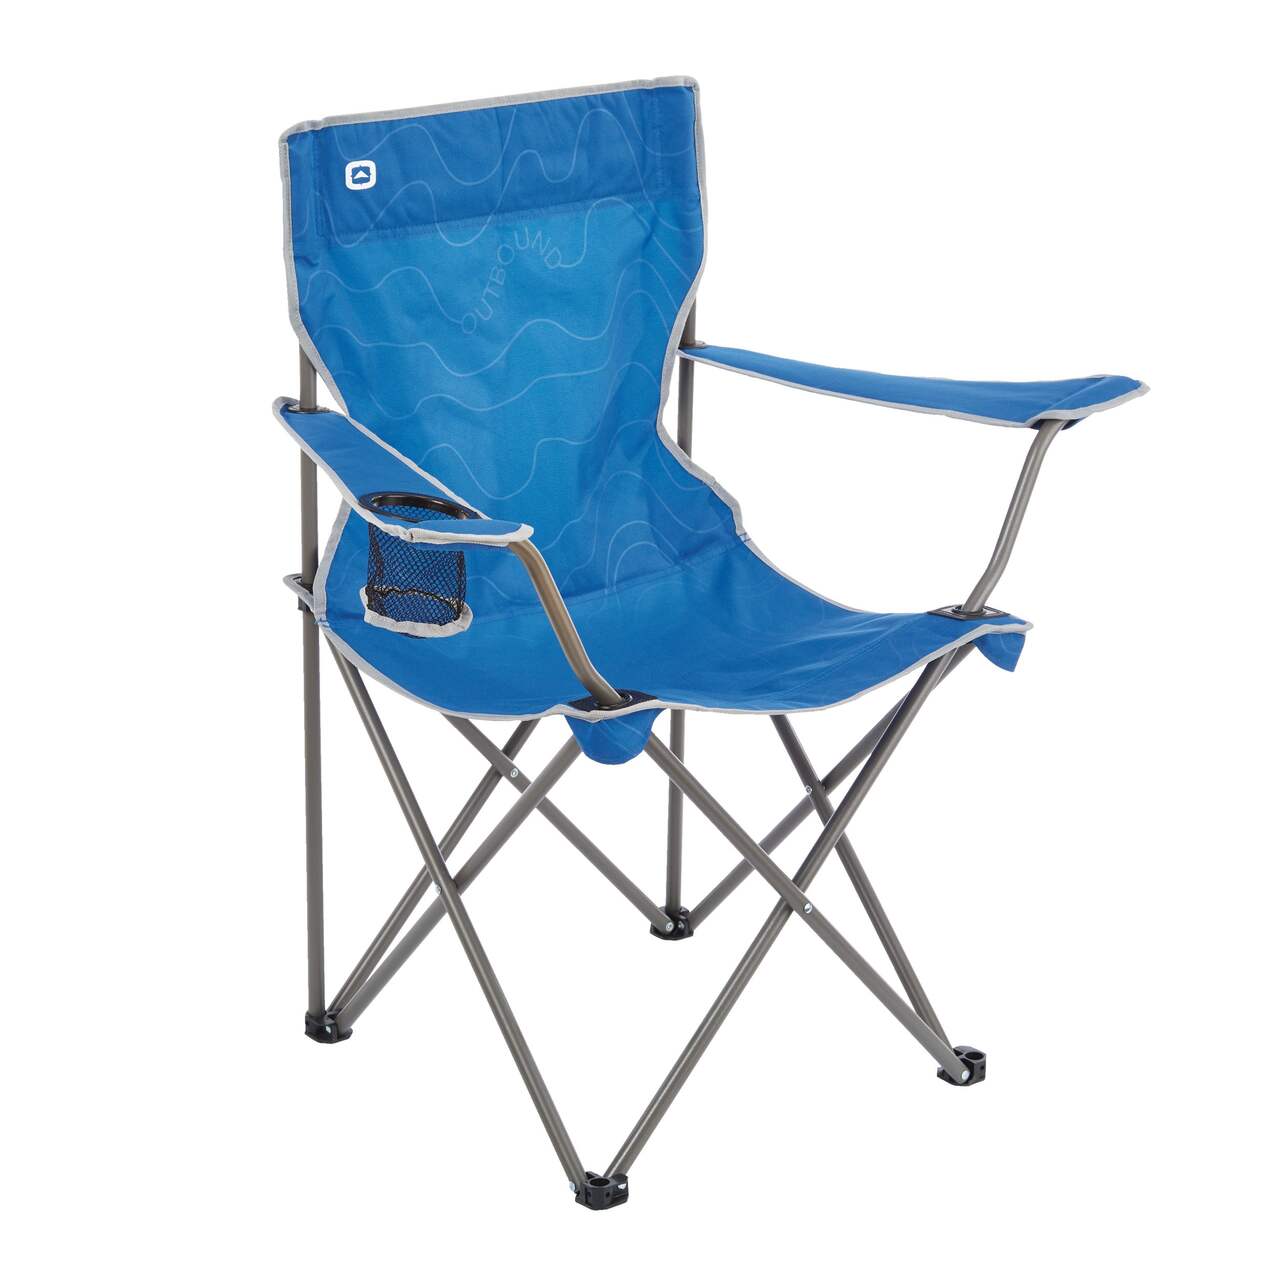 Outbound Deluxe Lightweight Folding Camping Quad Chair w/ Cup Holder &  Carry Bag, Assorted